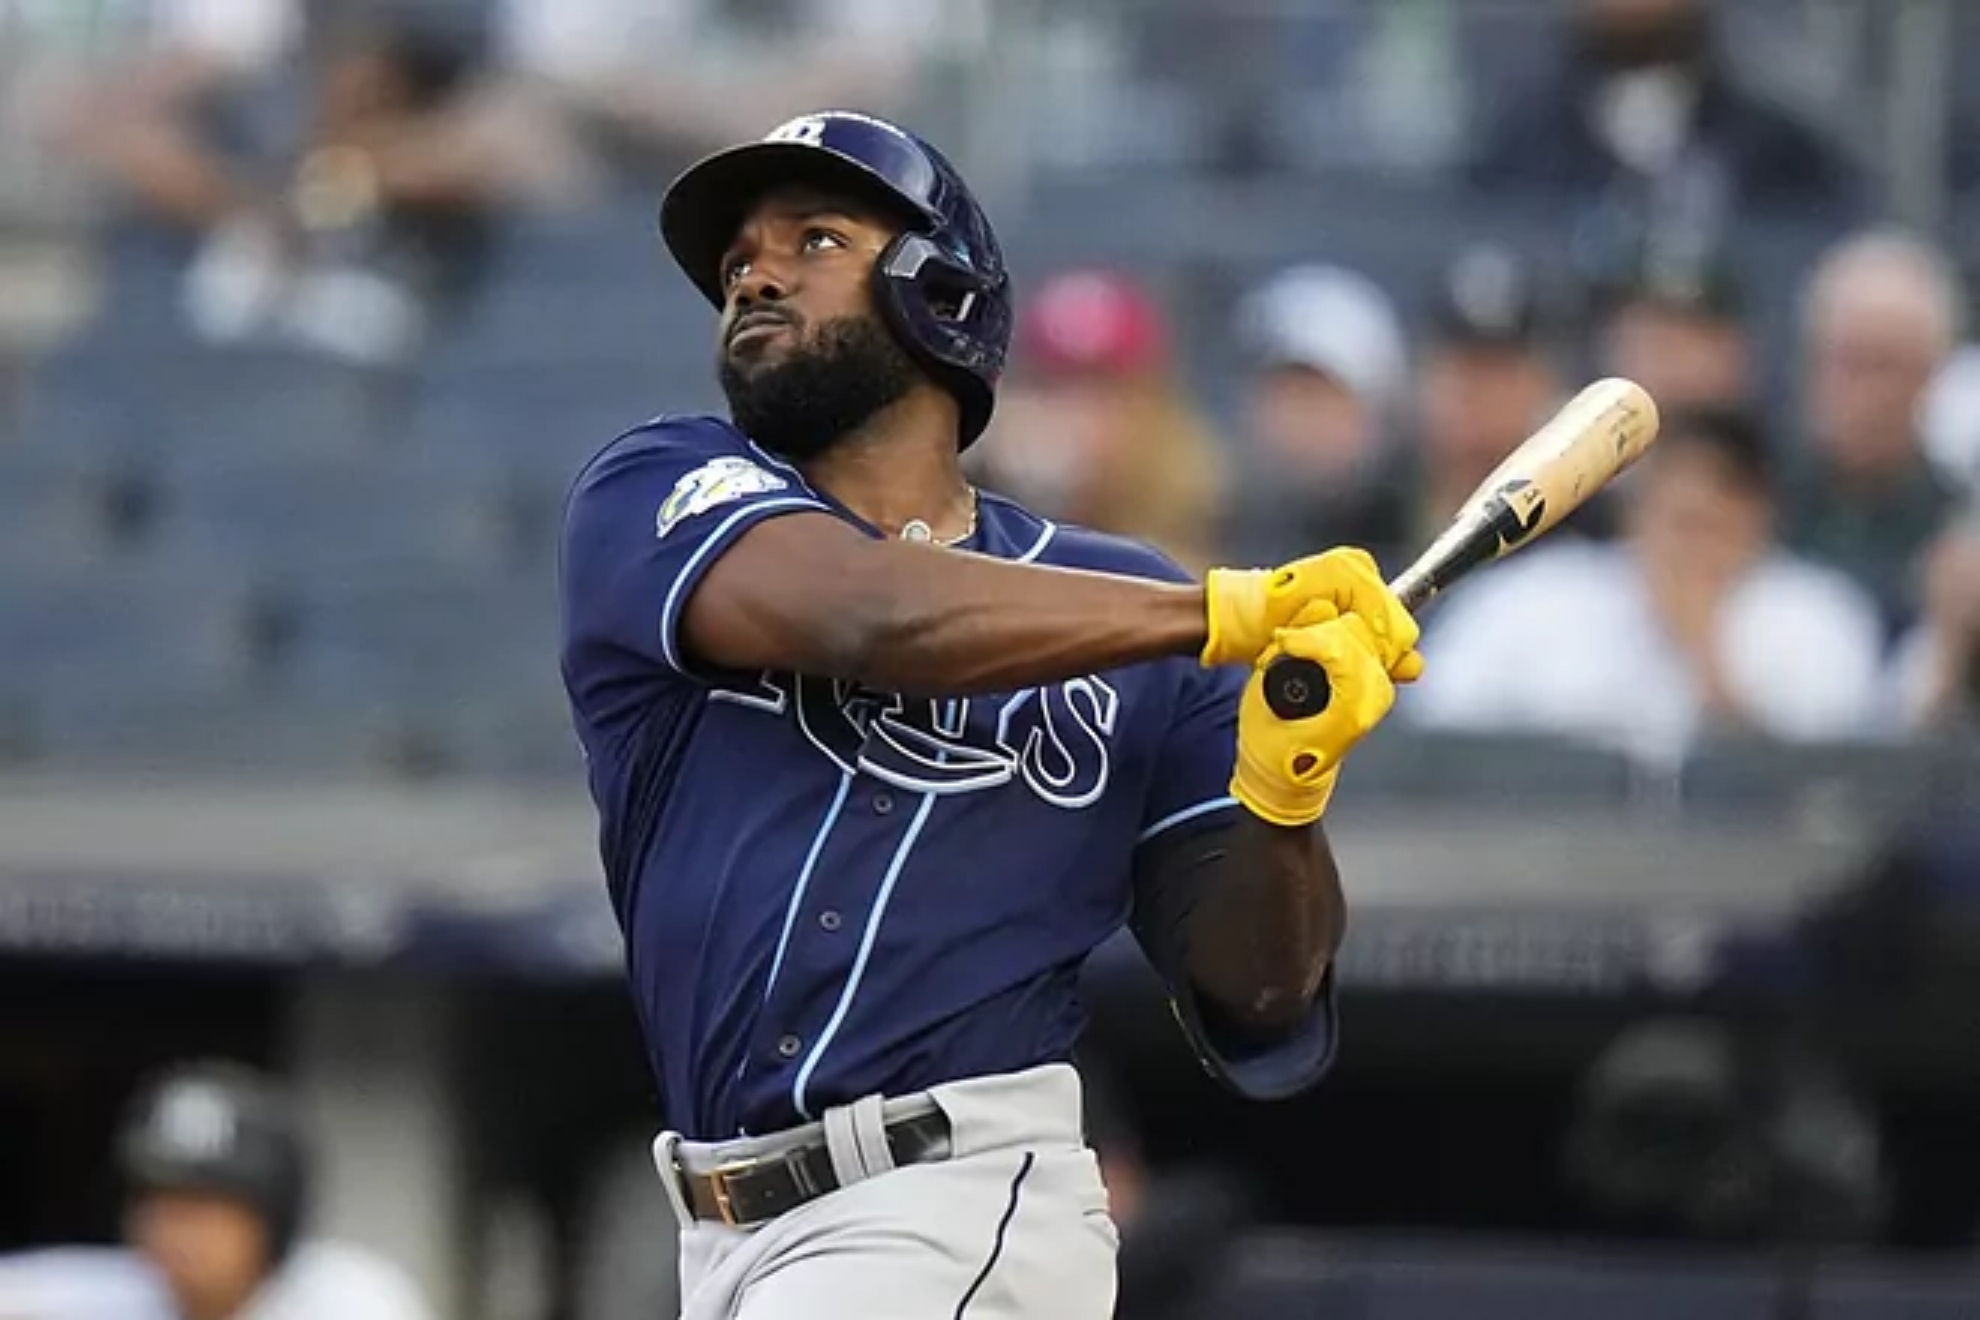 Rays secure their 30th win beating the Yankees with a powerful grand slam by Yandy Diaz